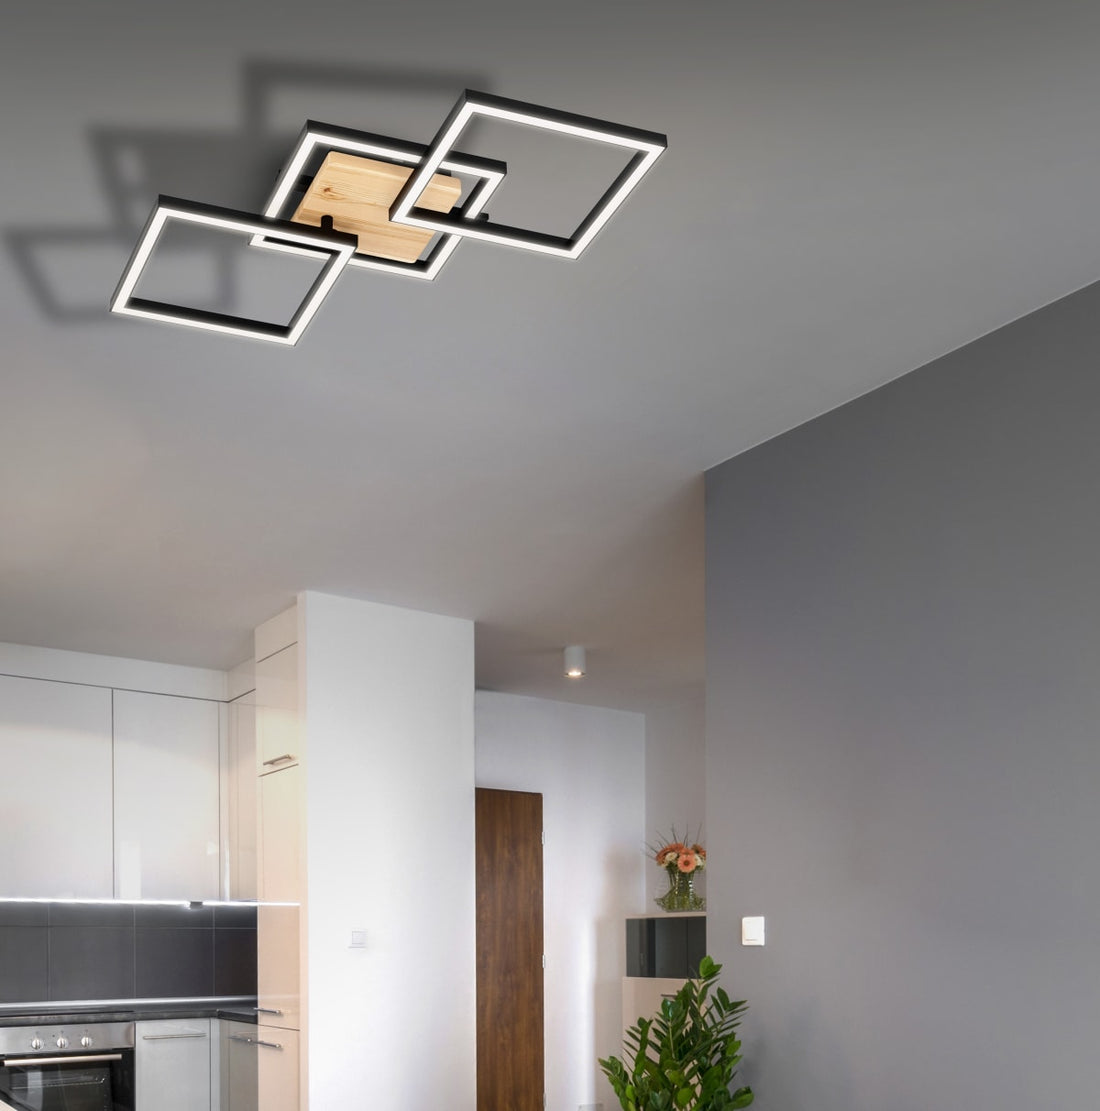 ROG METAL AND WOOD CEILING LAMP 36X47.5CM LED 33W NATURAL LIGHT - best price from Maltashopper.com BR420008508